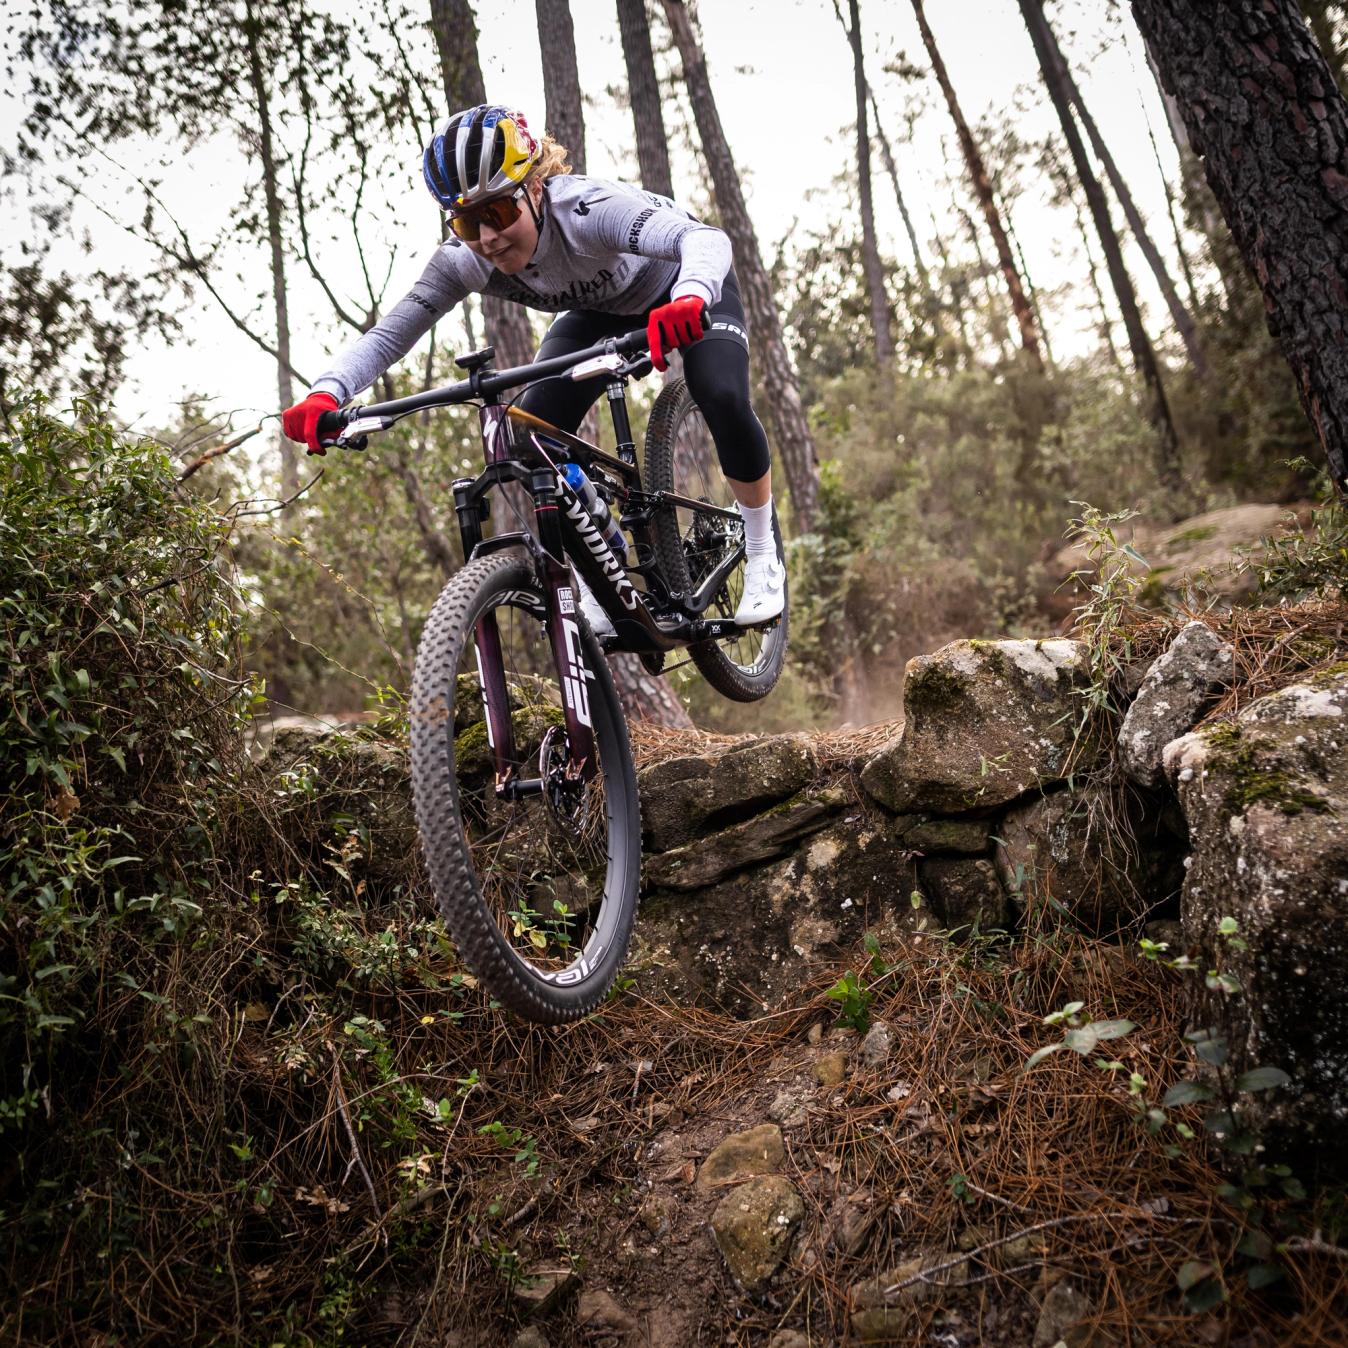 The Epic 8 has updated geometry and suspension kinematics aimed at increasing the bikes technical ability 